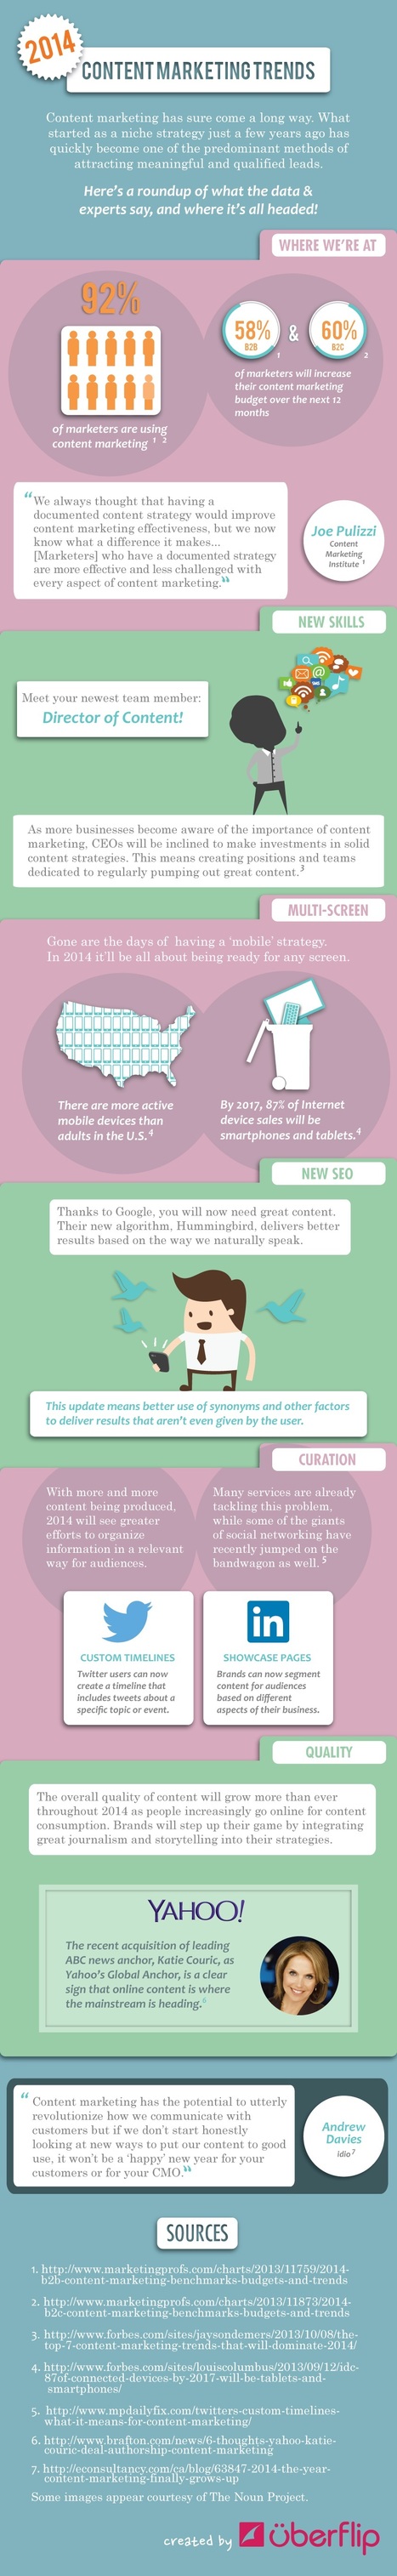 What Will Content Marketing Look Like in 2014? [Infographic] - Profs | #TheMarketingTechAlert | The MarTech Digest | Scoop.it